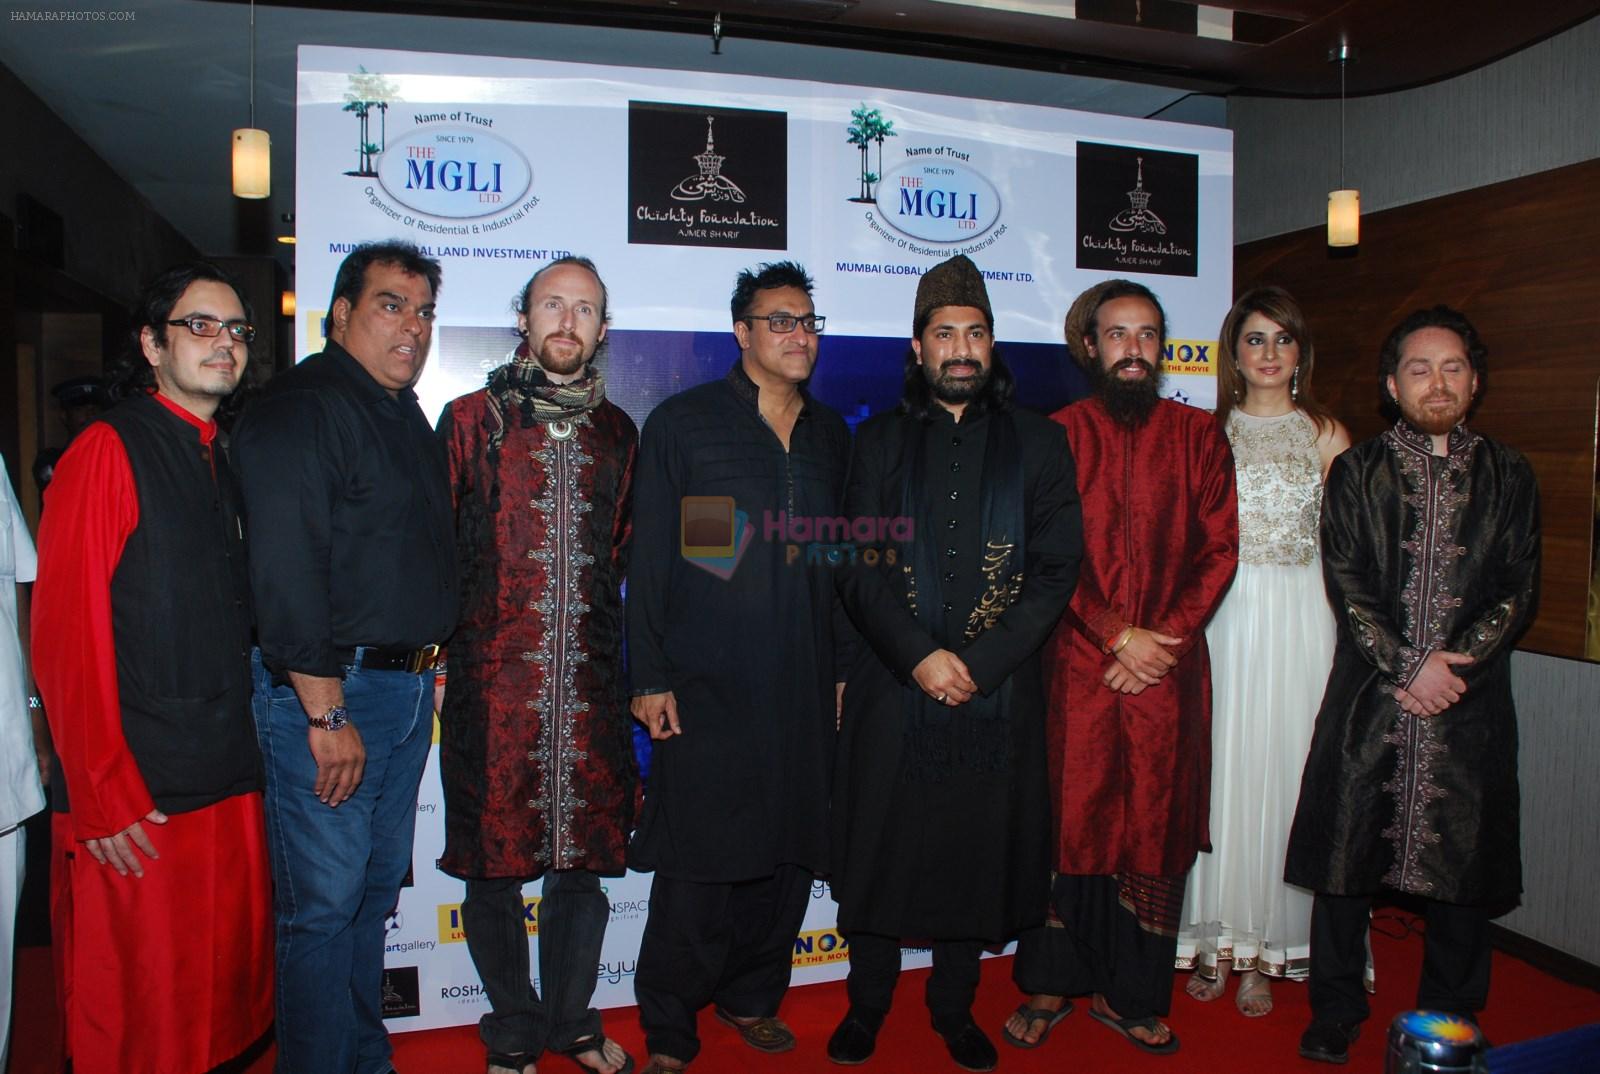 Mohammed Morani at Chisty foundation event in Malad, Mumbai on 20th Feb 2015